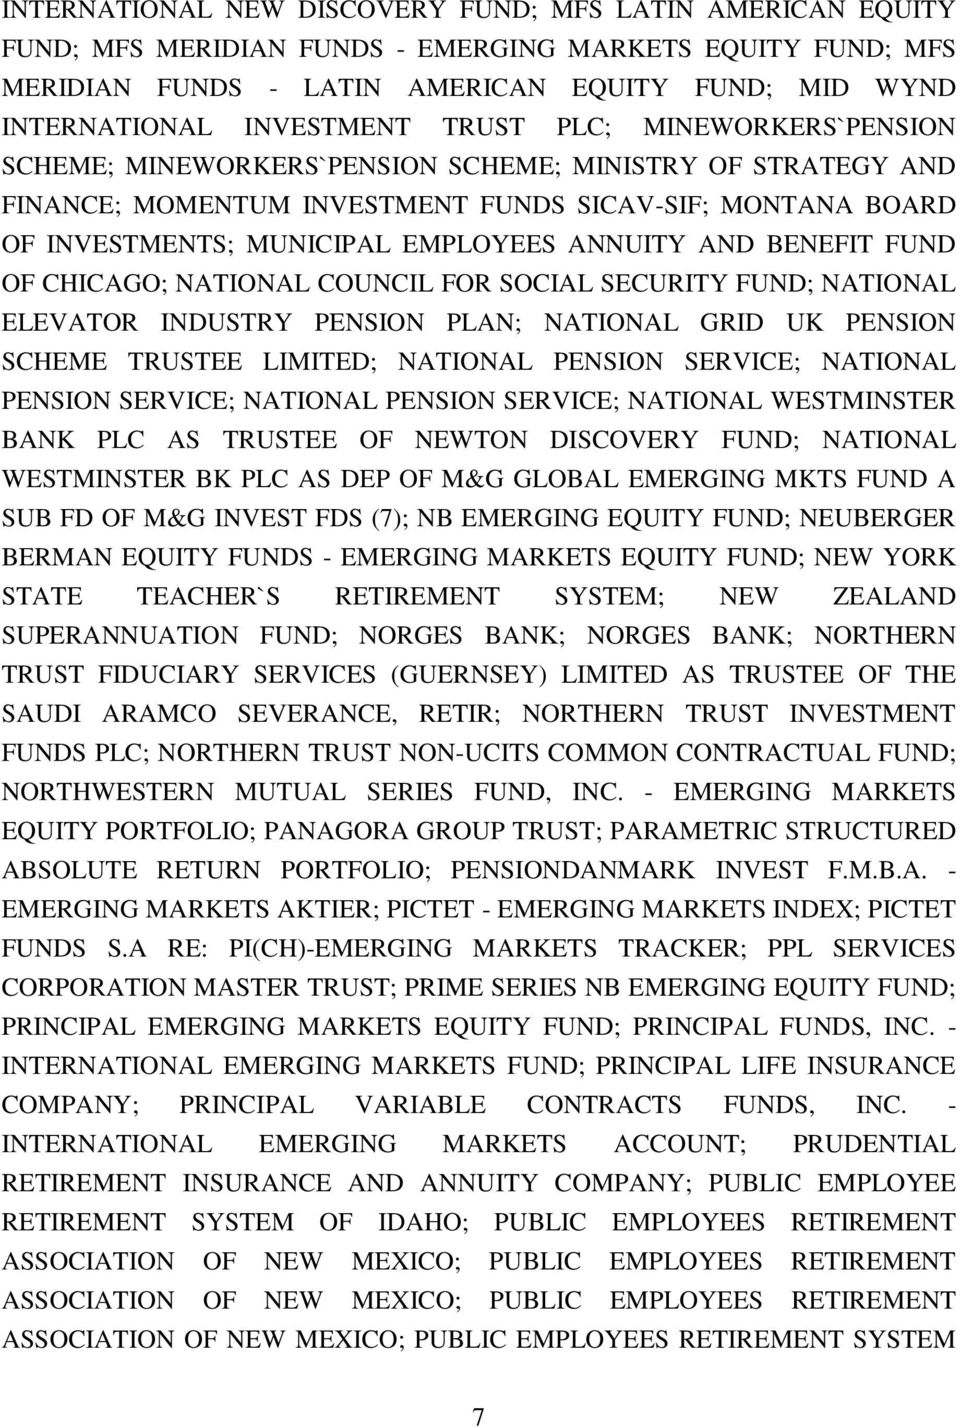 BENEFIT FUND OF CHICAGO; NATIONAL COUNCIL FOR SOCIAL SECURITY FUND; NATIONAL ELEVATOR INDUSTRY PENSION PLAN; NATIONAL GRID UK PENSION SCHEME TRUSTEE LIMITED; NATIONAL PENSION SERVICE; NATIONAL